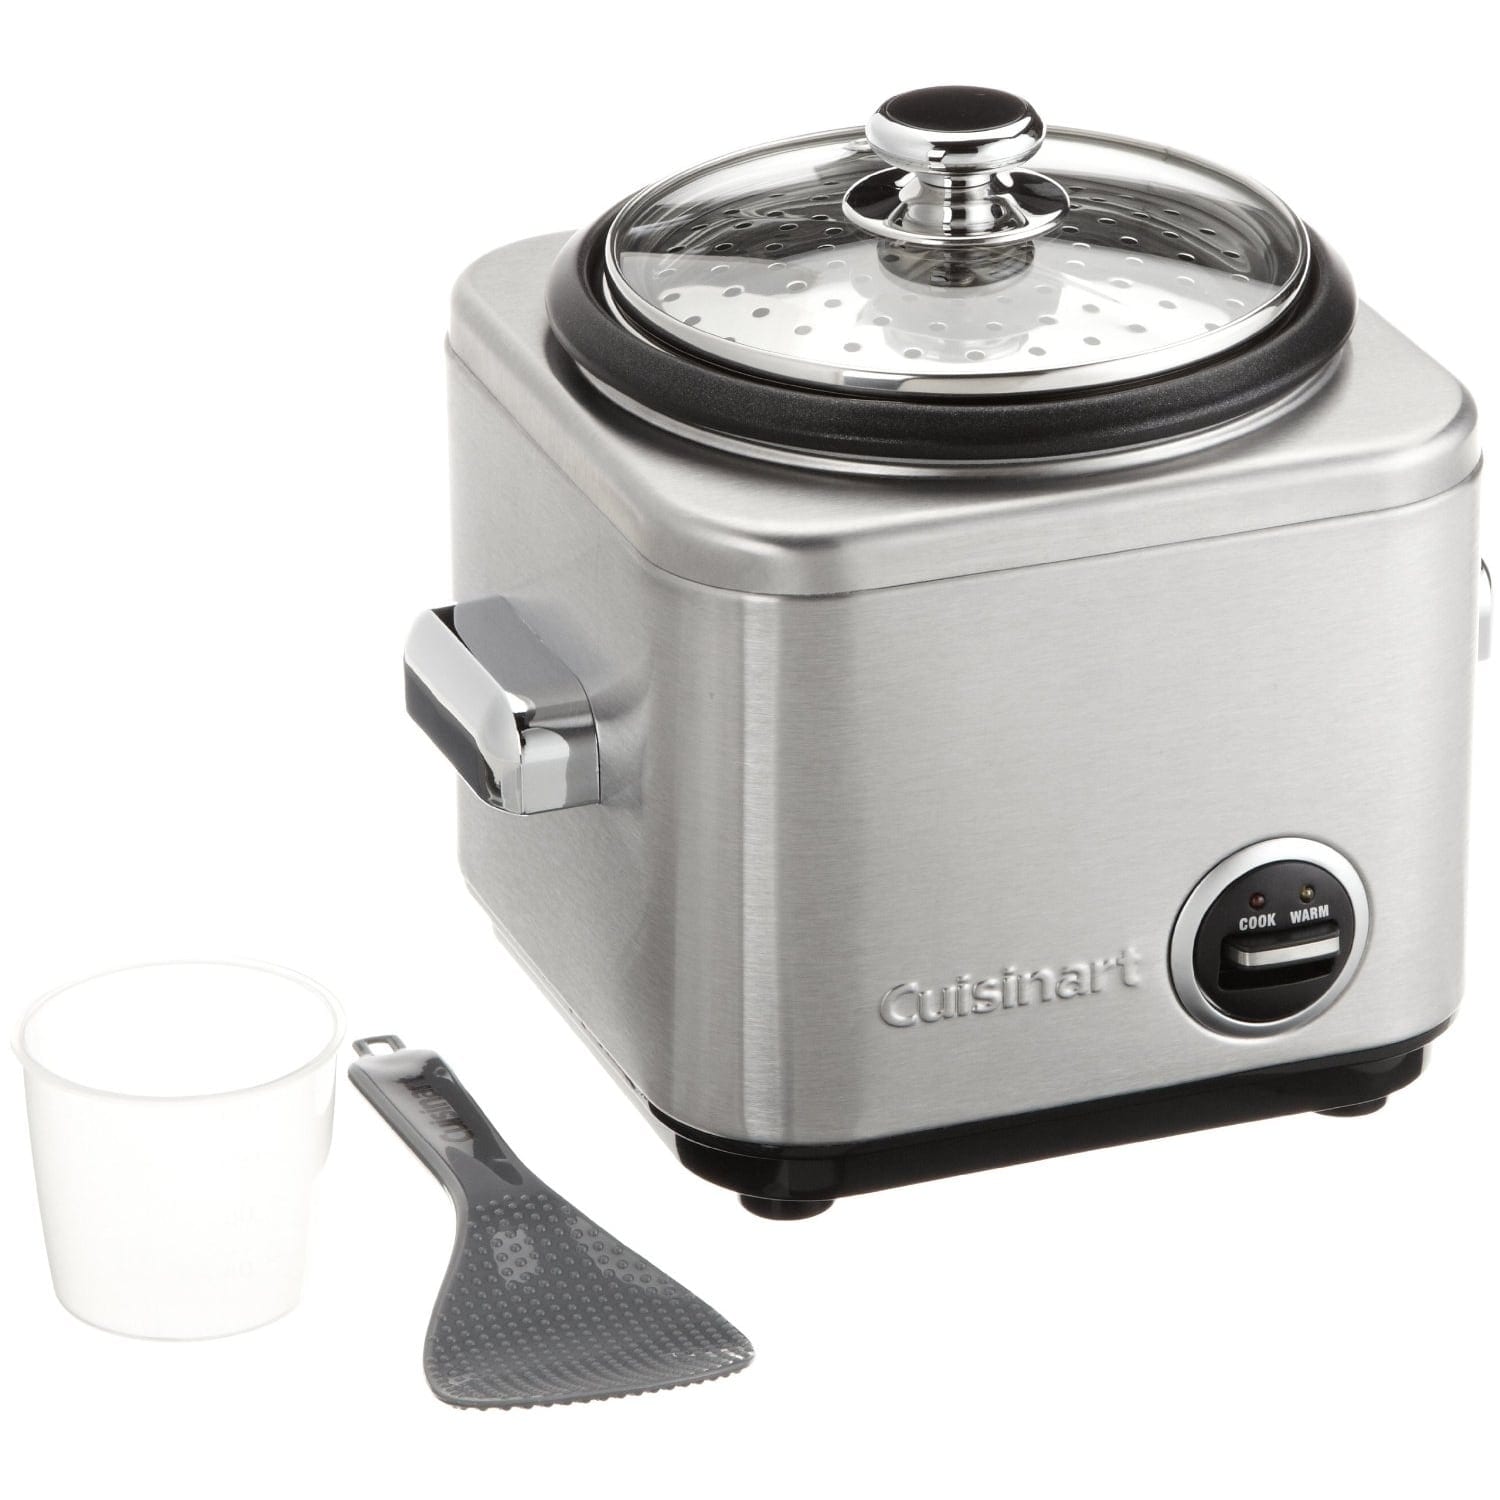  Cuisinart CRC-400 4 Cup Rice Cooker, Stainless Steel Exterior &  Food Processor, Mini-Prep 3 Cup, 24 oz, Brushed Chrome and Nickel,  DLC-2ABC: Home & Kitchen